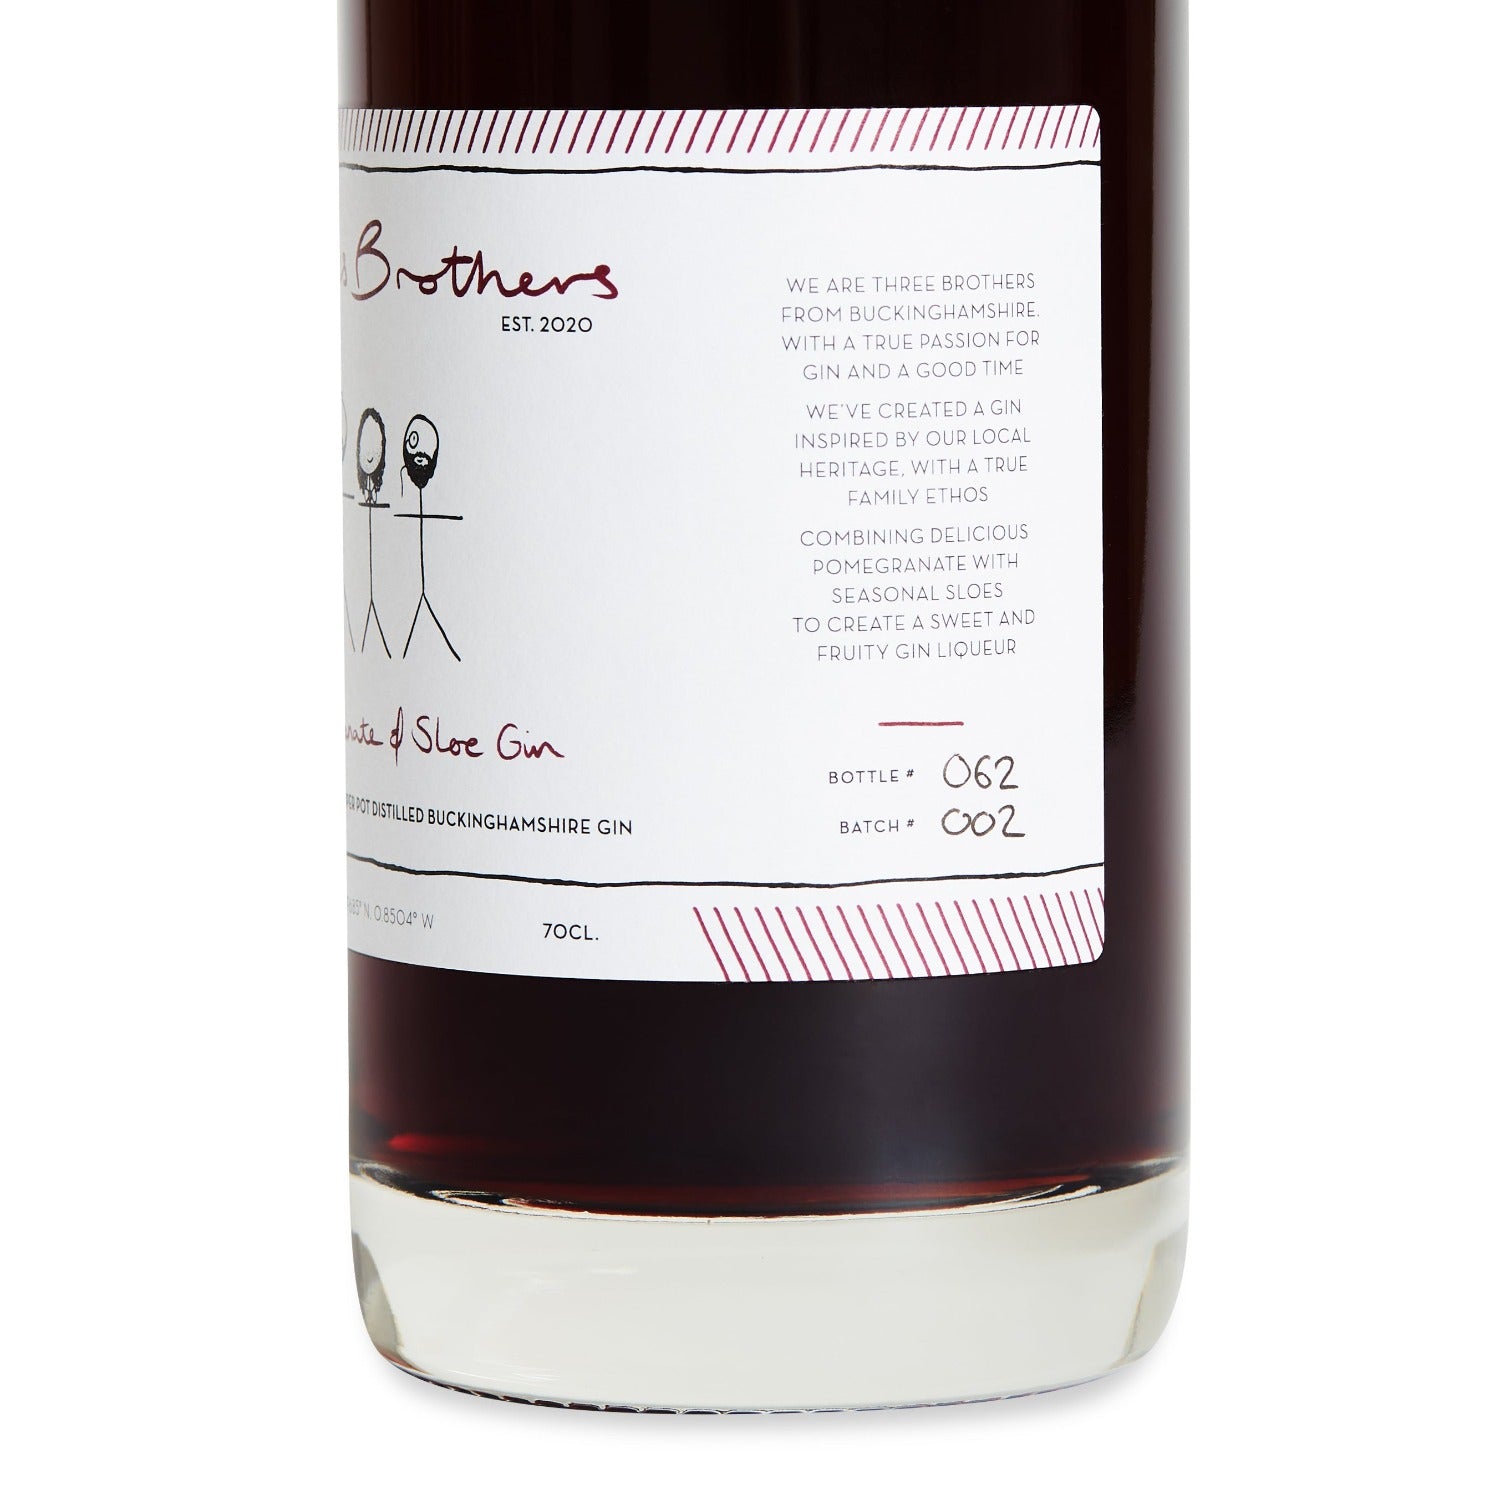 Pomegranate and Sloe Gin Liqueur (70cl)